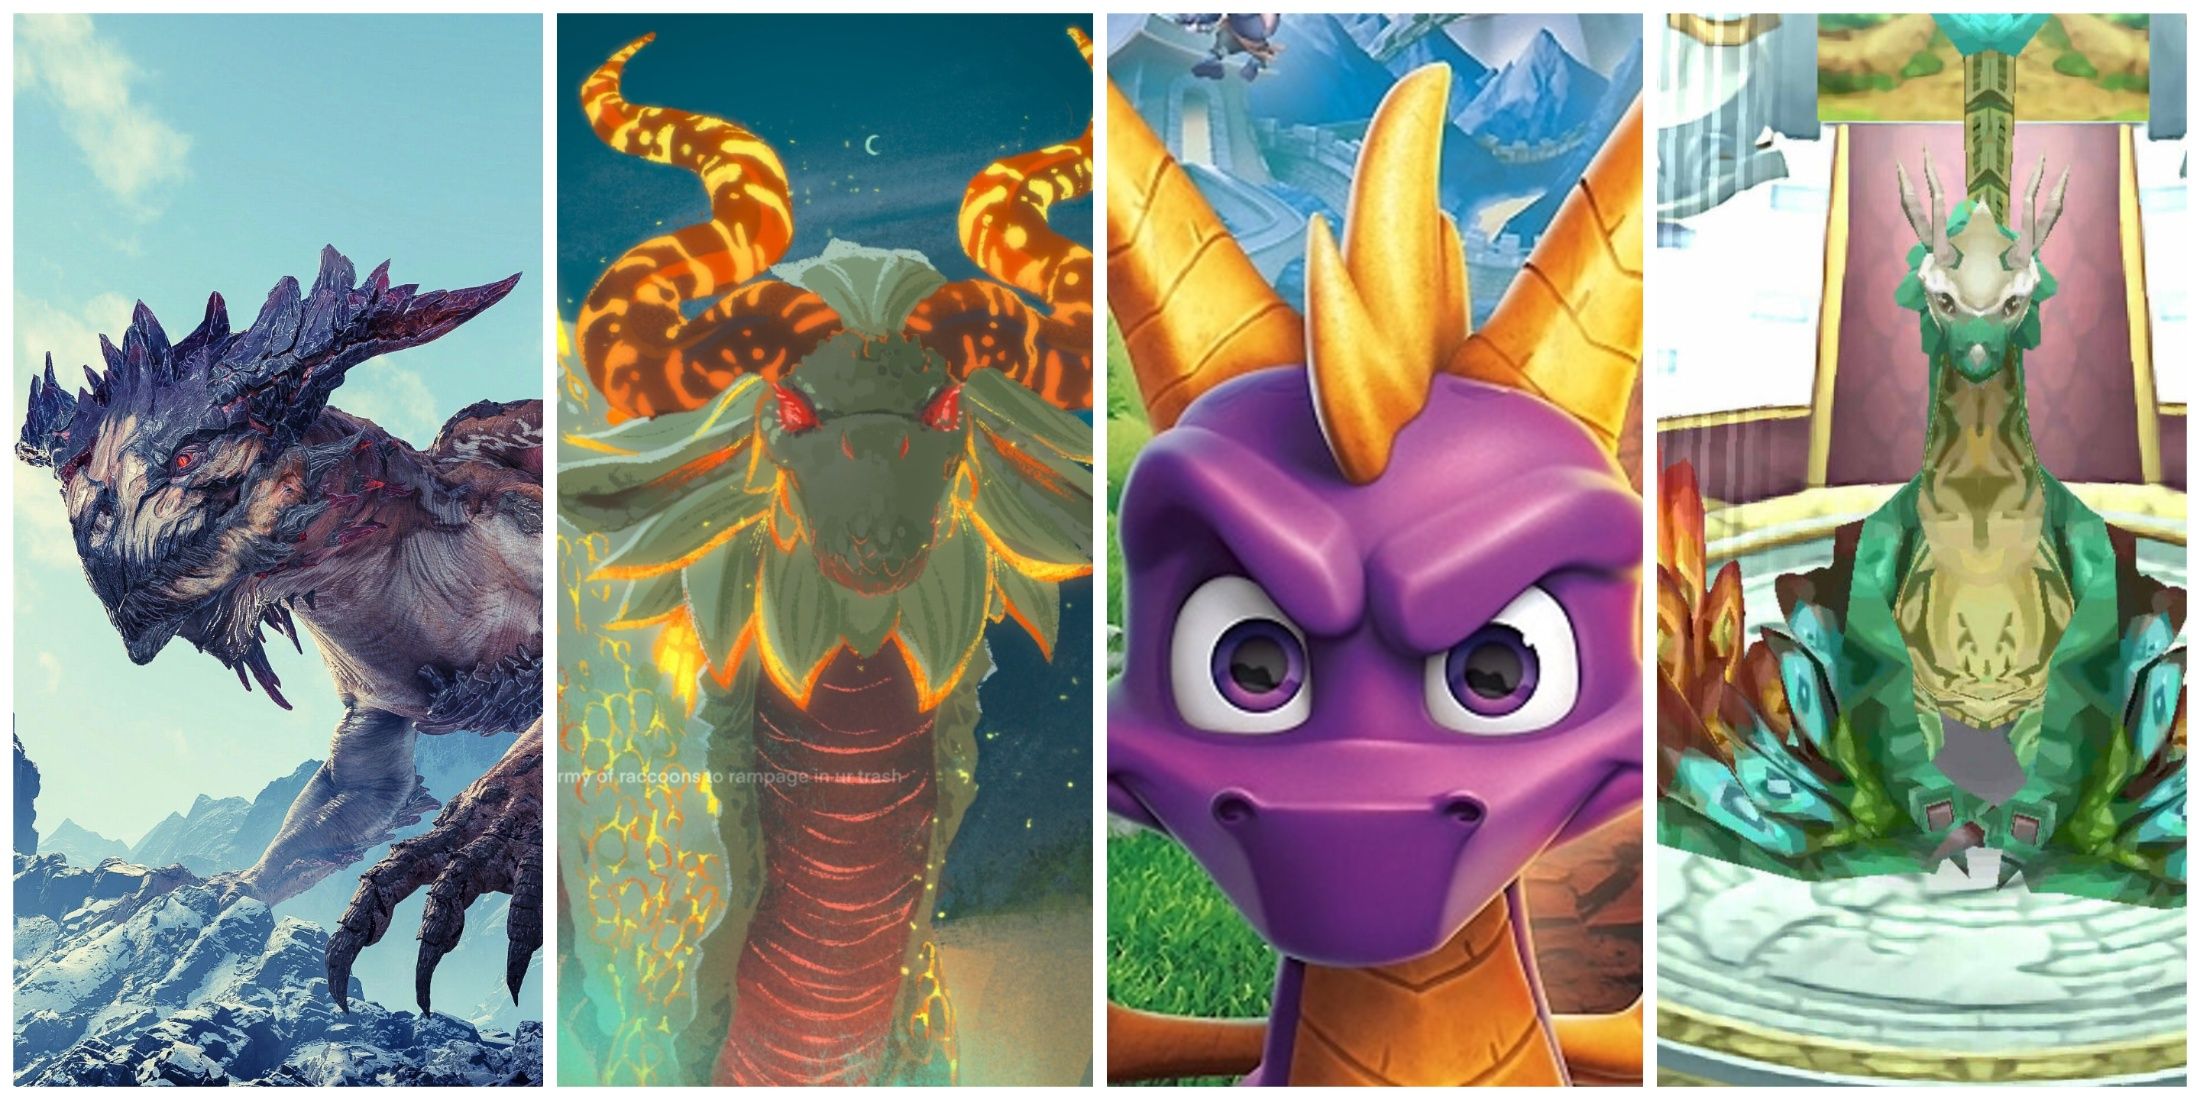 Dragons from God of War, Breath of the Wild, Spyro, and Rune Factory 4